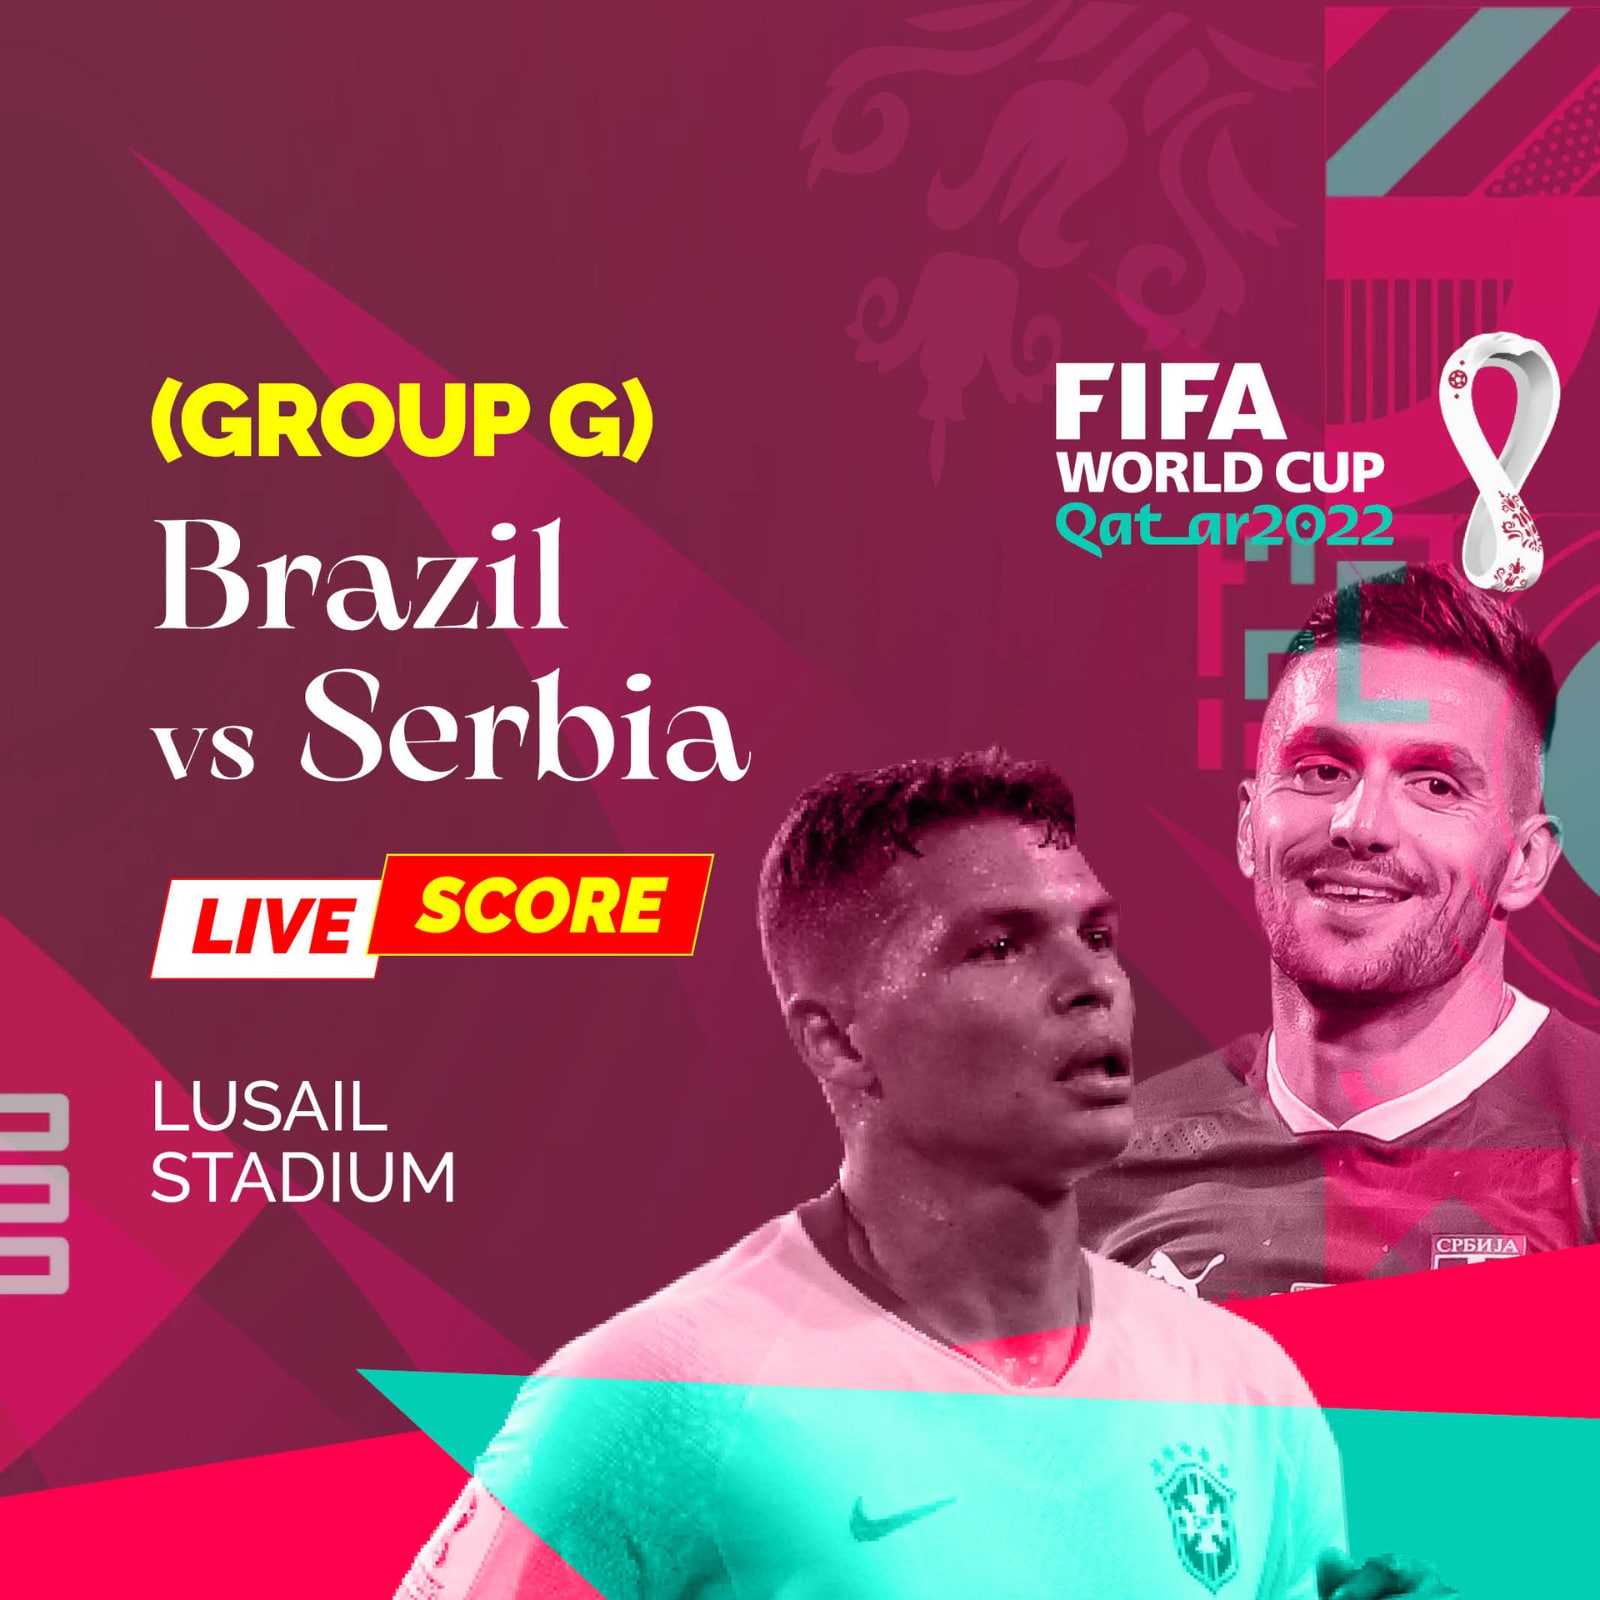 How to listen to the FIFA World Cup 2022ᵀᴹ LIVE and FREE on SBS